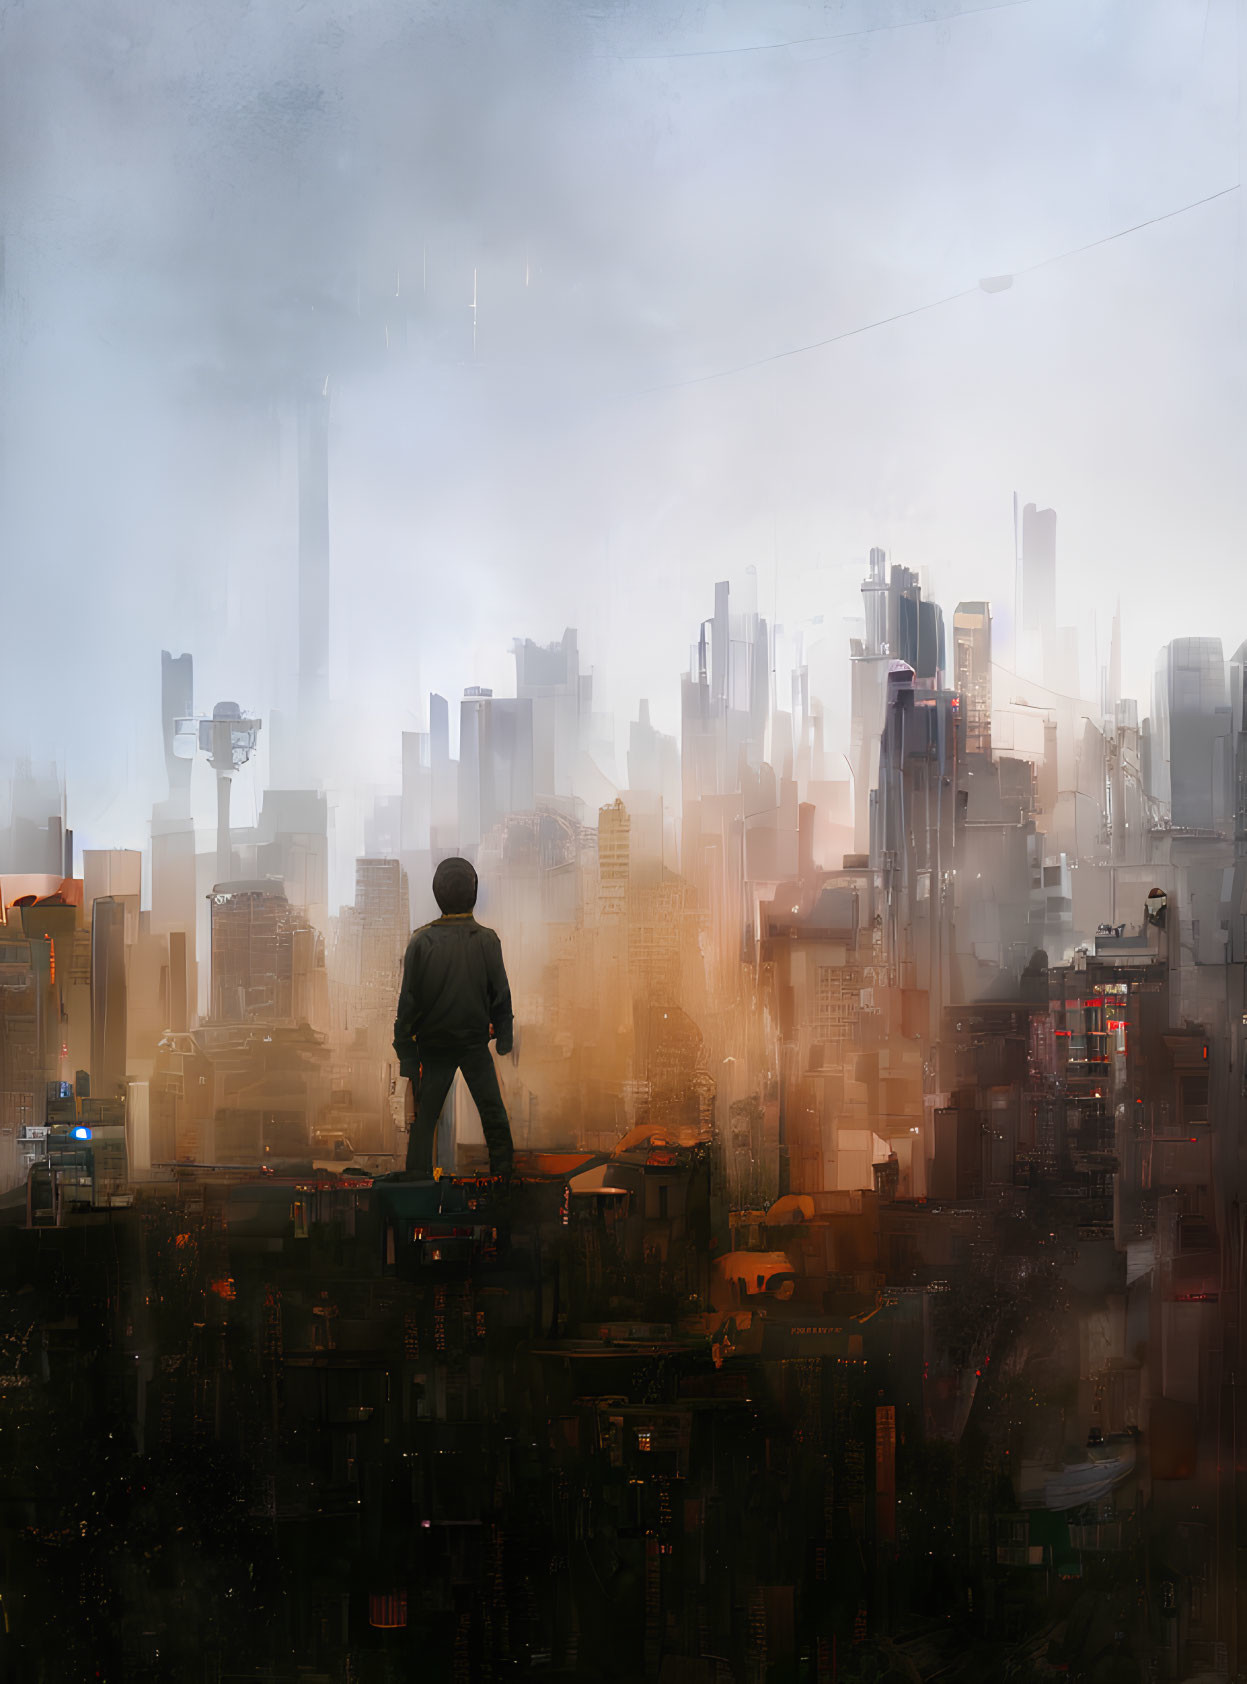 Person overlooking misty cityscape with skyscrapers